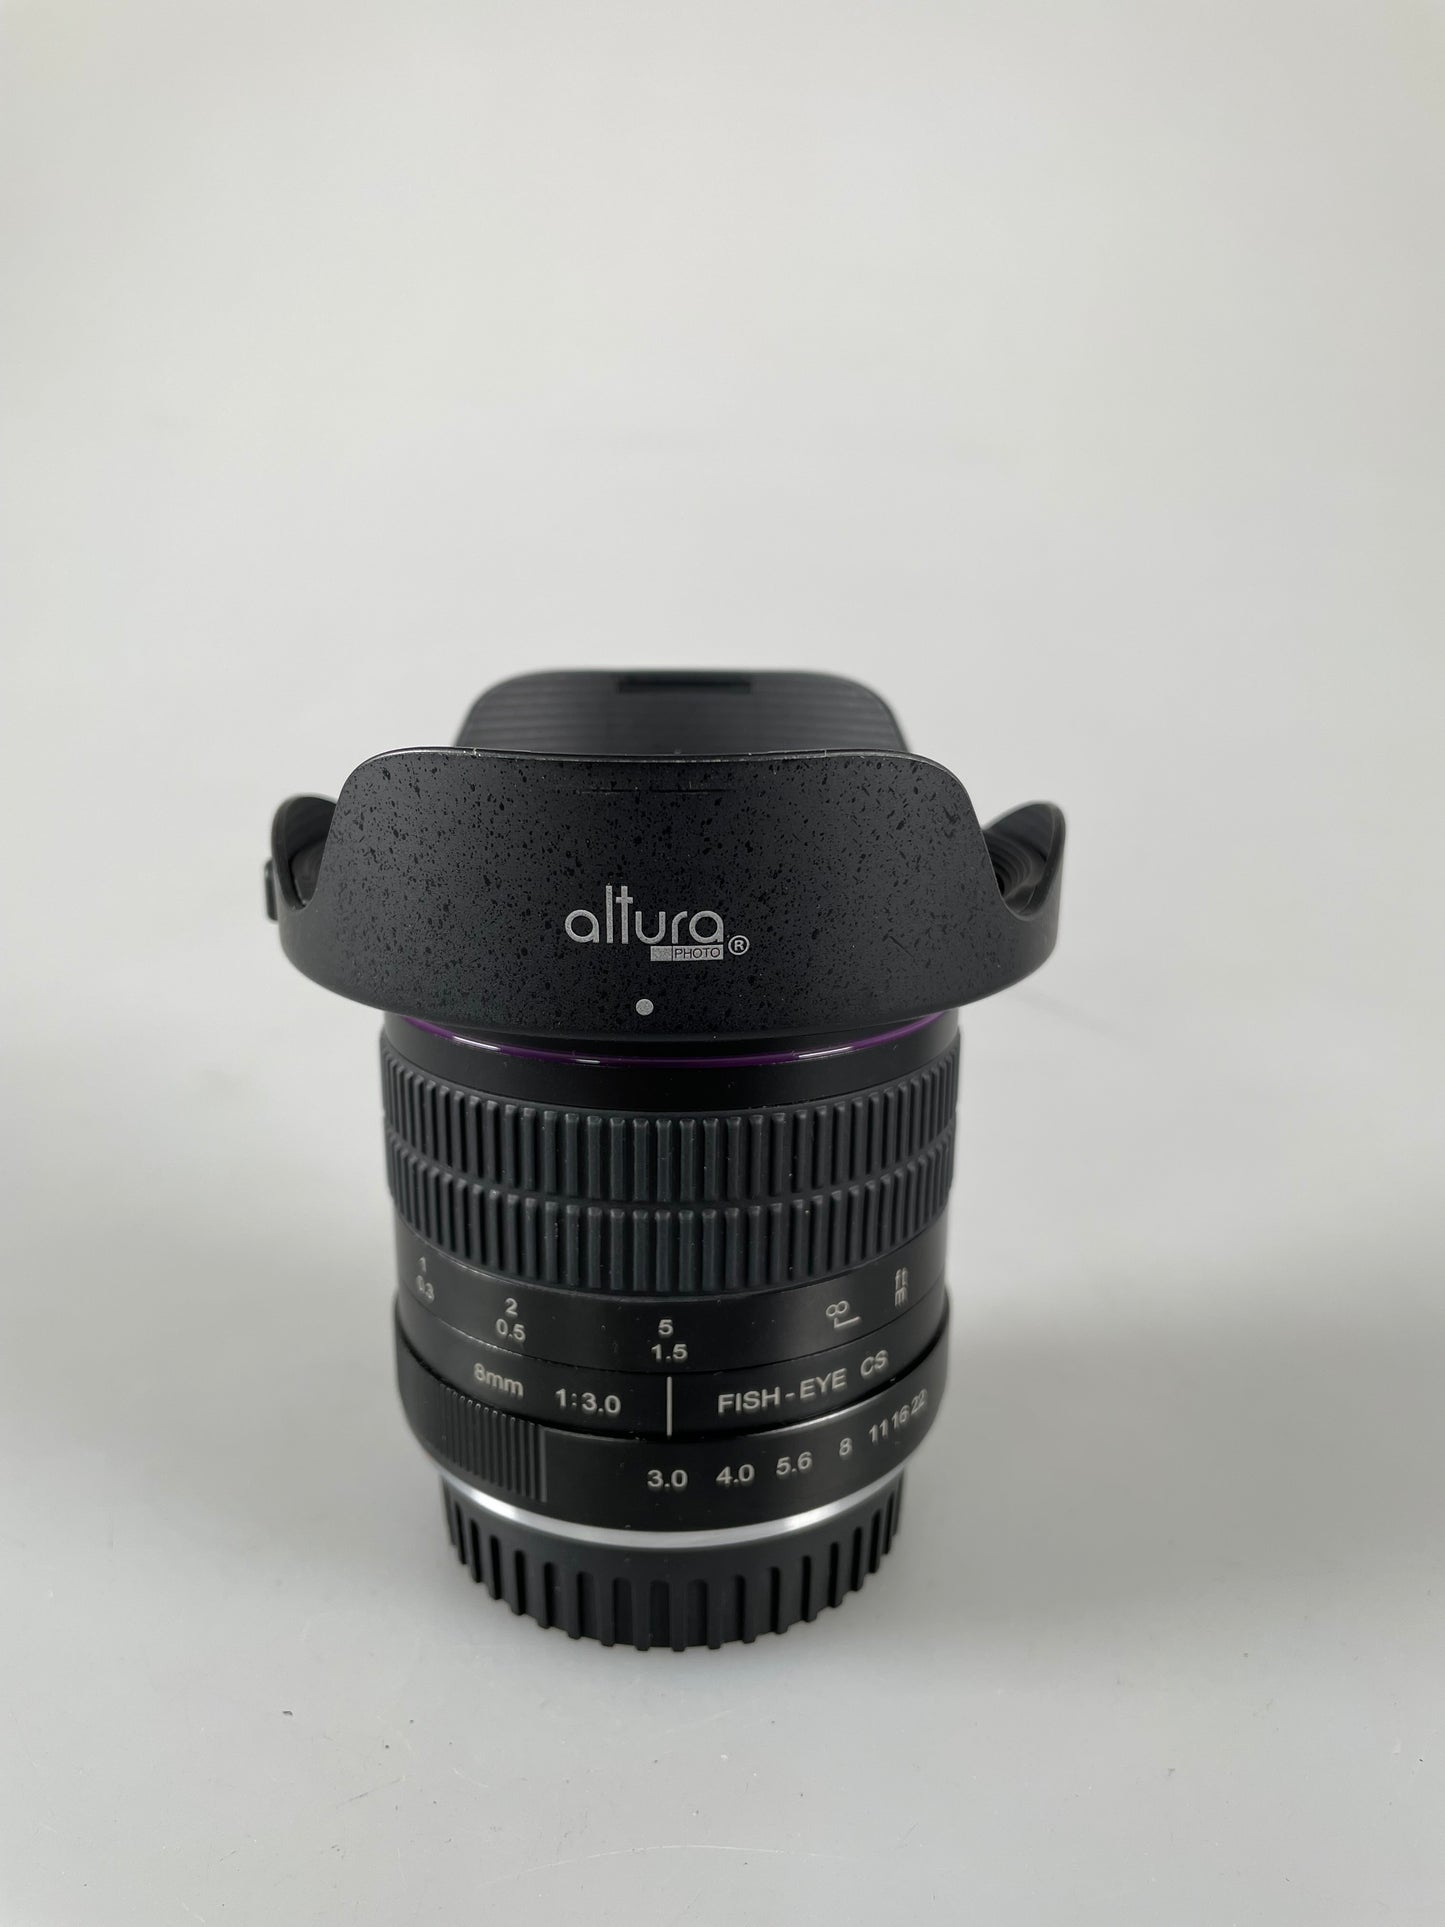 Altura Photo 8mm f3.0 Professional Ultra Wide Angle Fisheye Lens for Canon